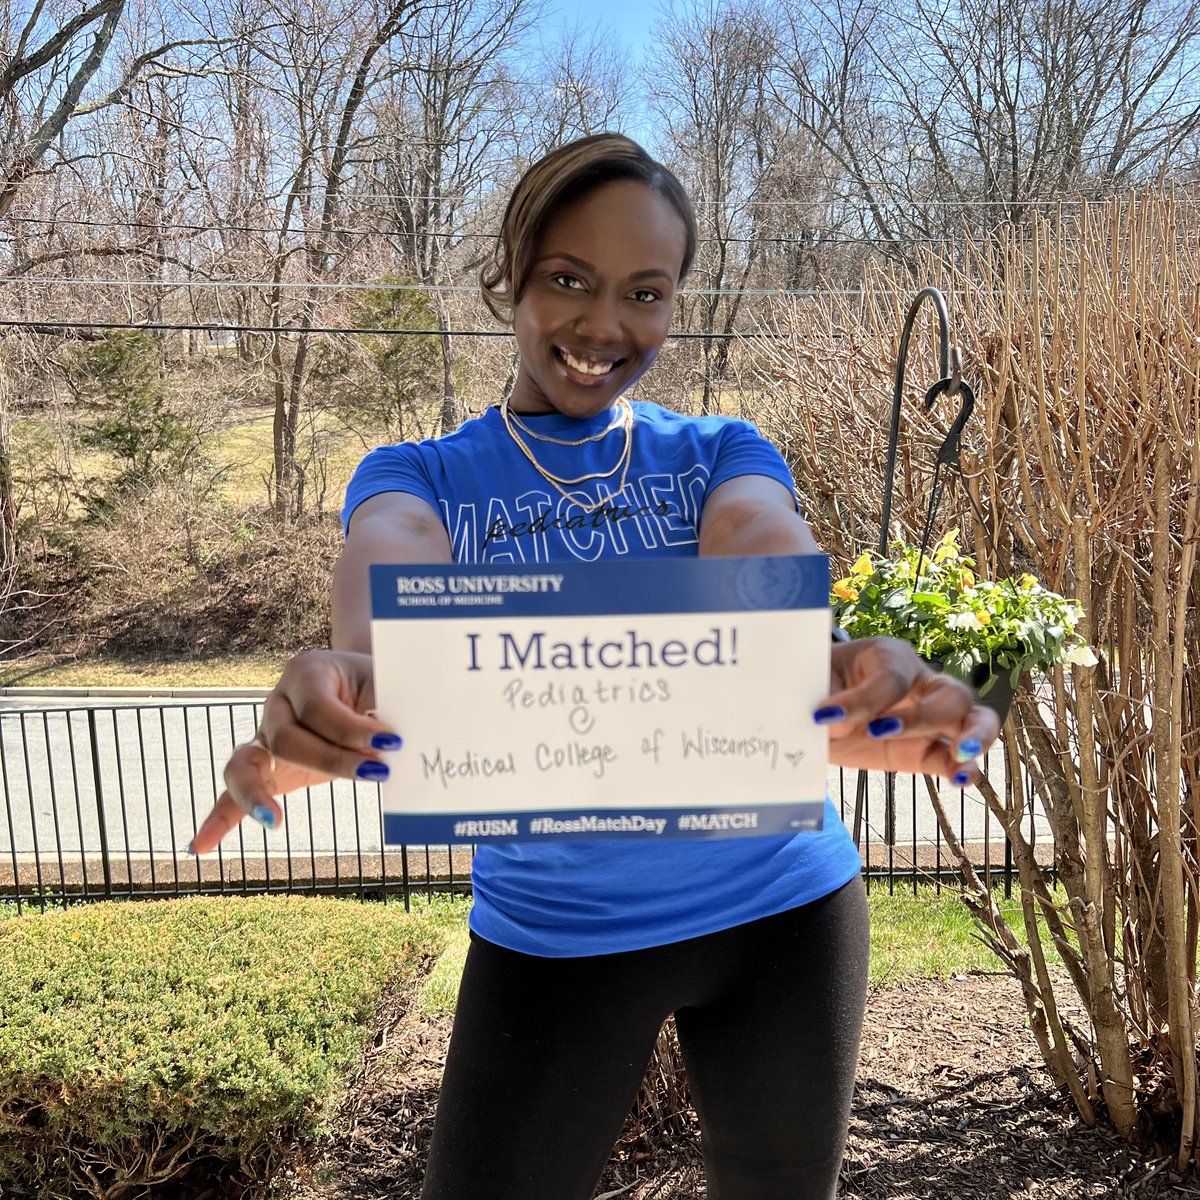 Issa MATCH! I’m going to Wisconsin, tied for #1 in my heart. I am so stoked! #PedsMatch22 #Match2022 #MedTwitter22 #IPickedPeds #FutureFAAP #RossMatchDay #NextGenPeds